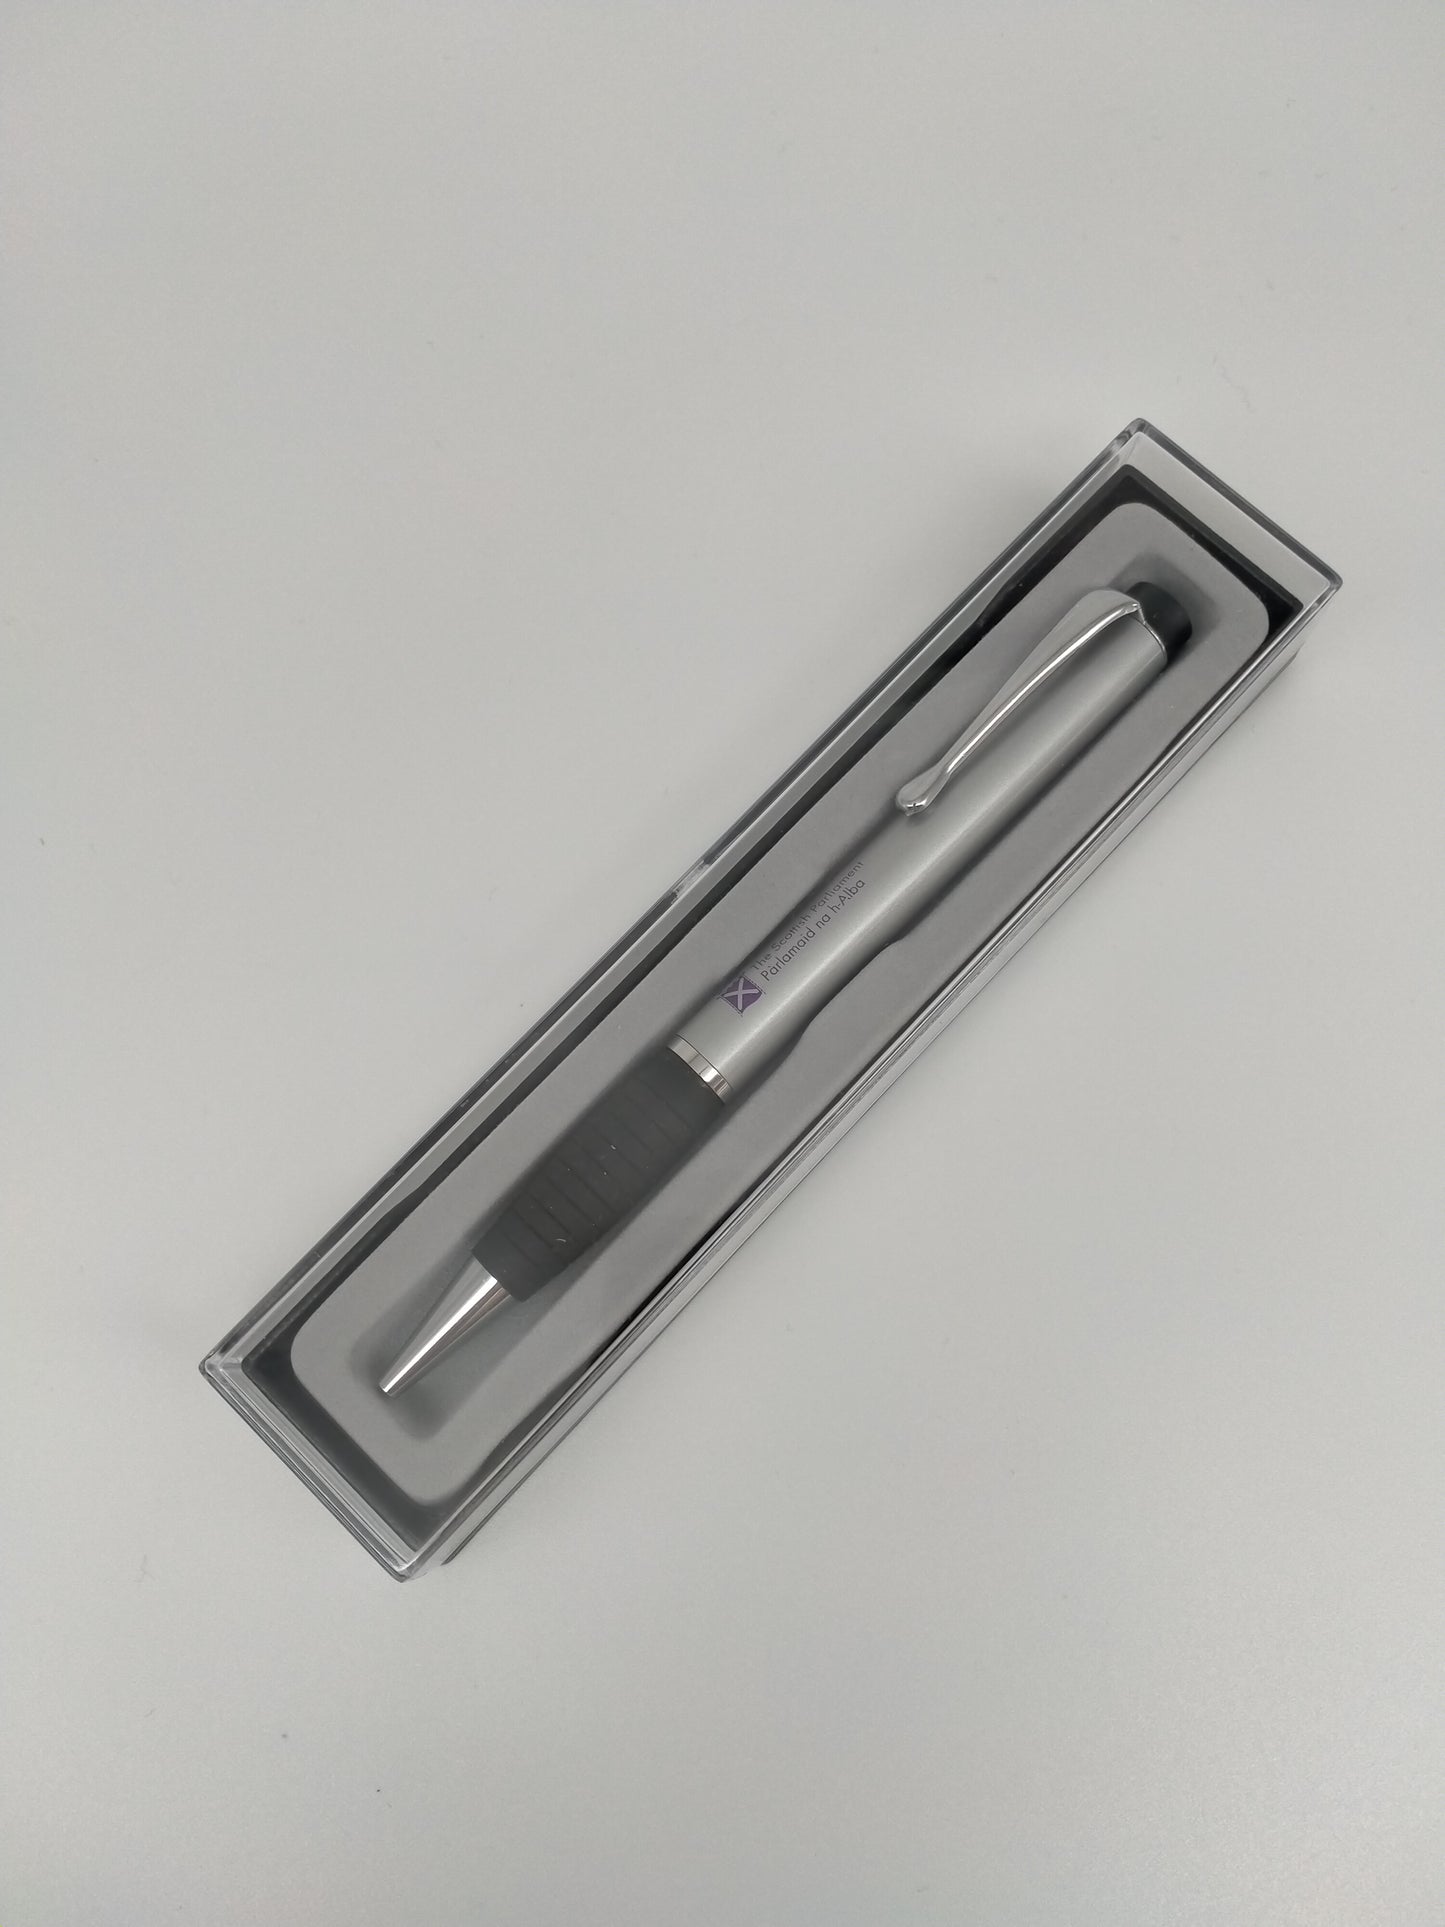 The pen inside its rectangular box with transparent lid.